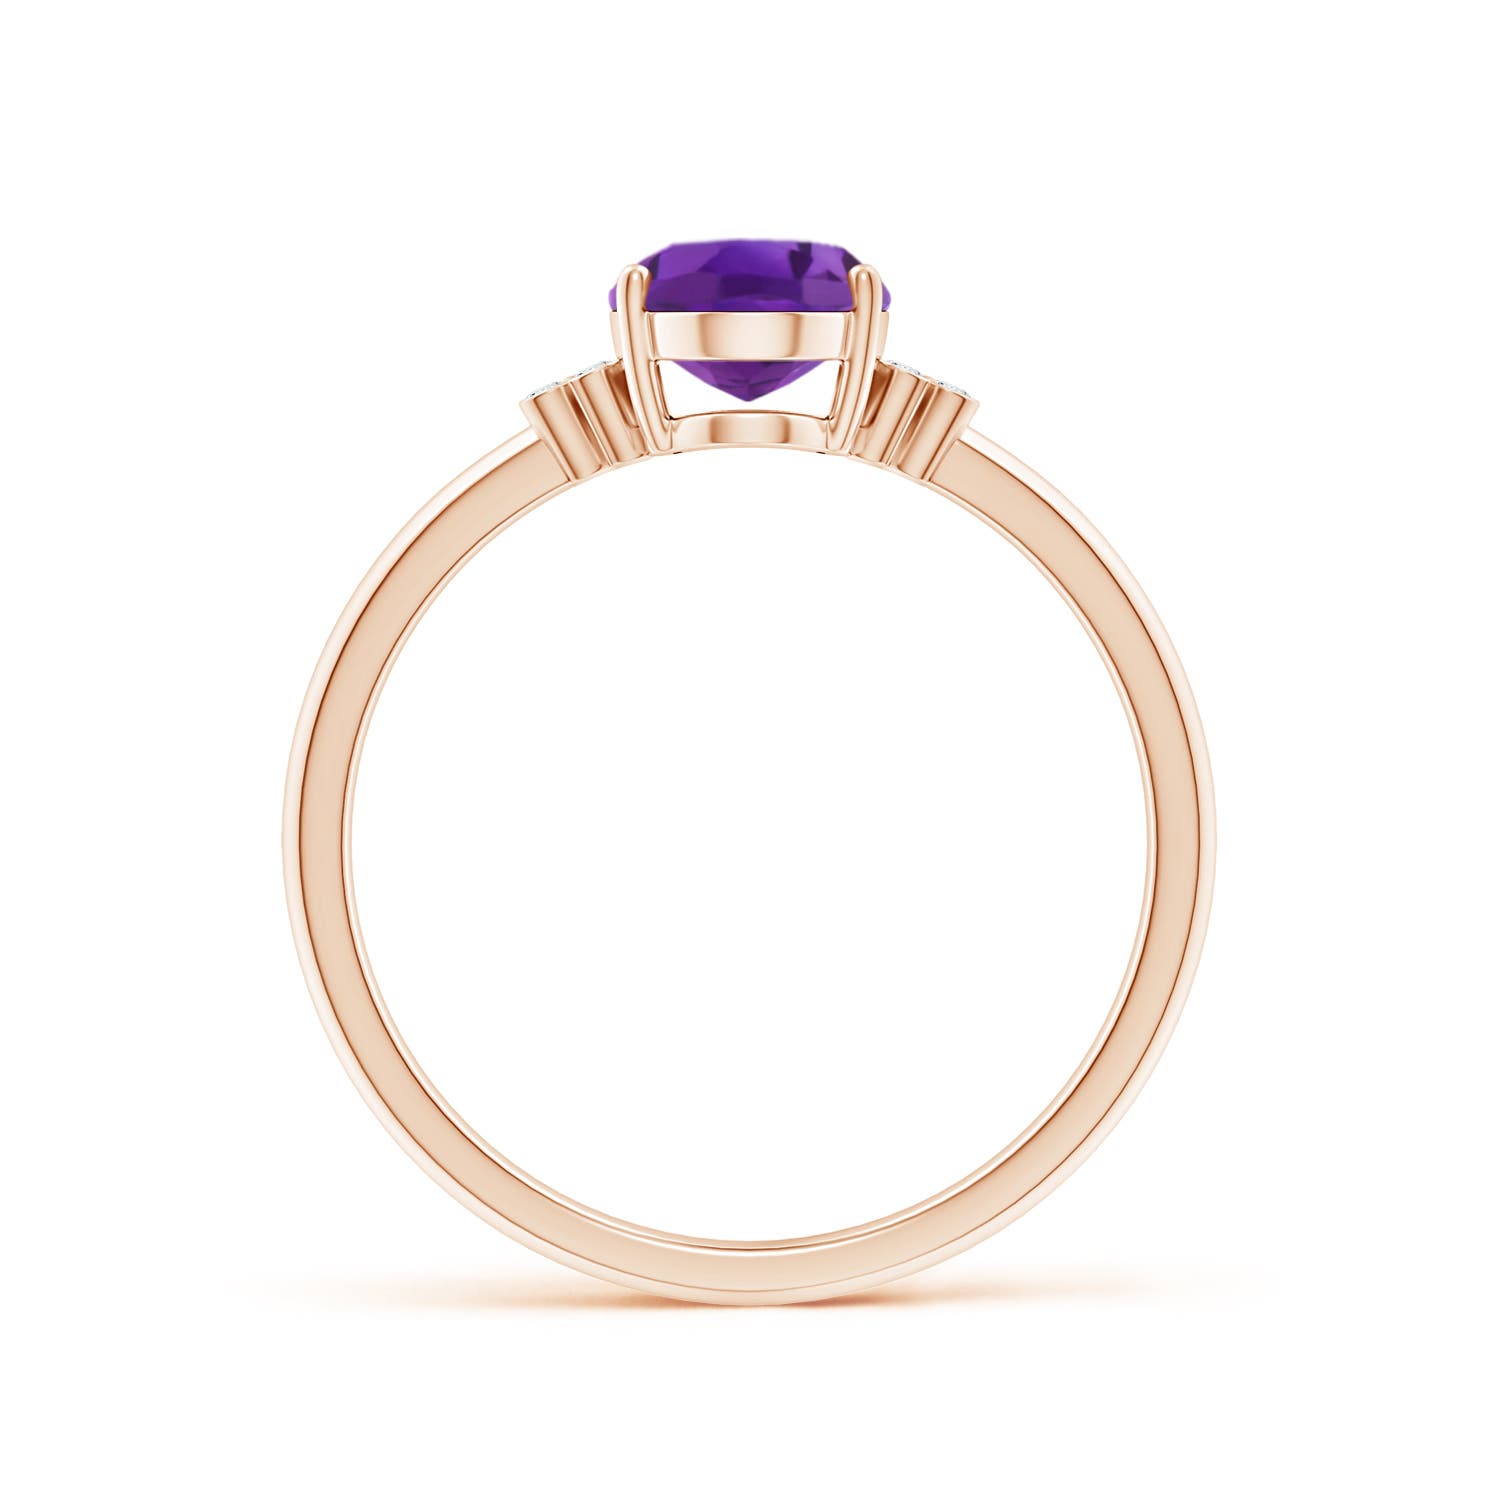 AAA- Amethyst / 1.2 CT / 14 KT Rose Gold